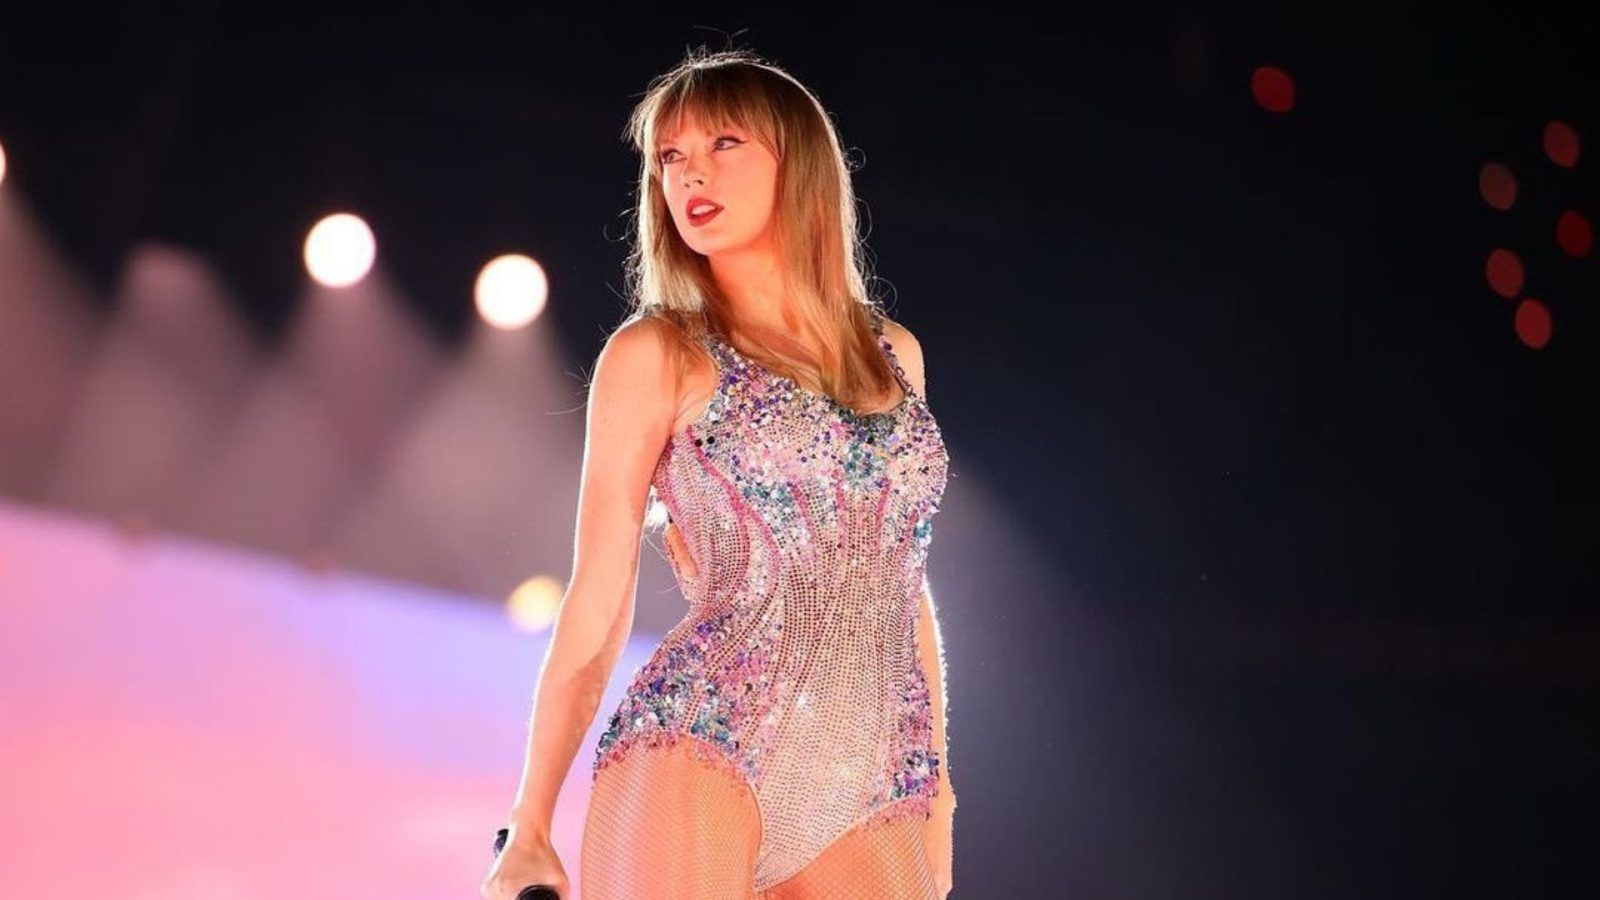 Taylor Swift: Eras Tour concert film is getting a worldwide release